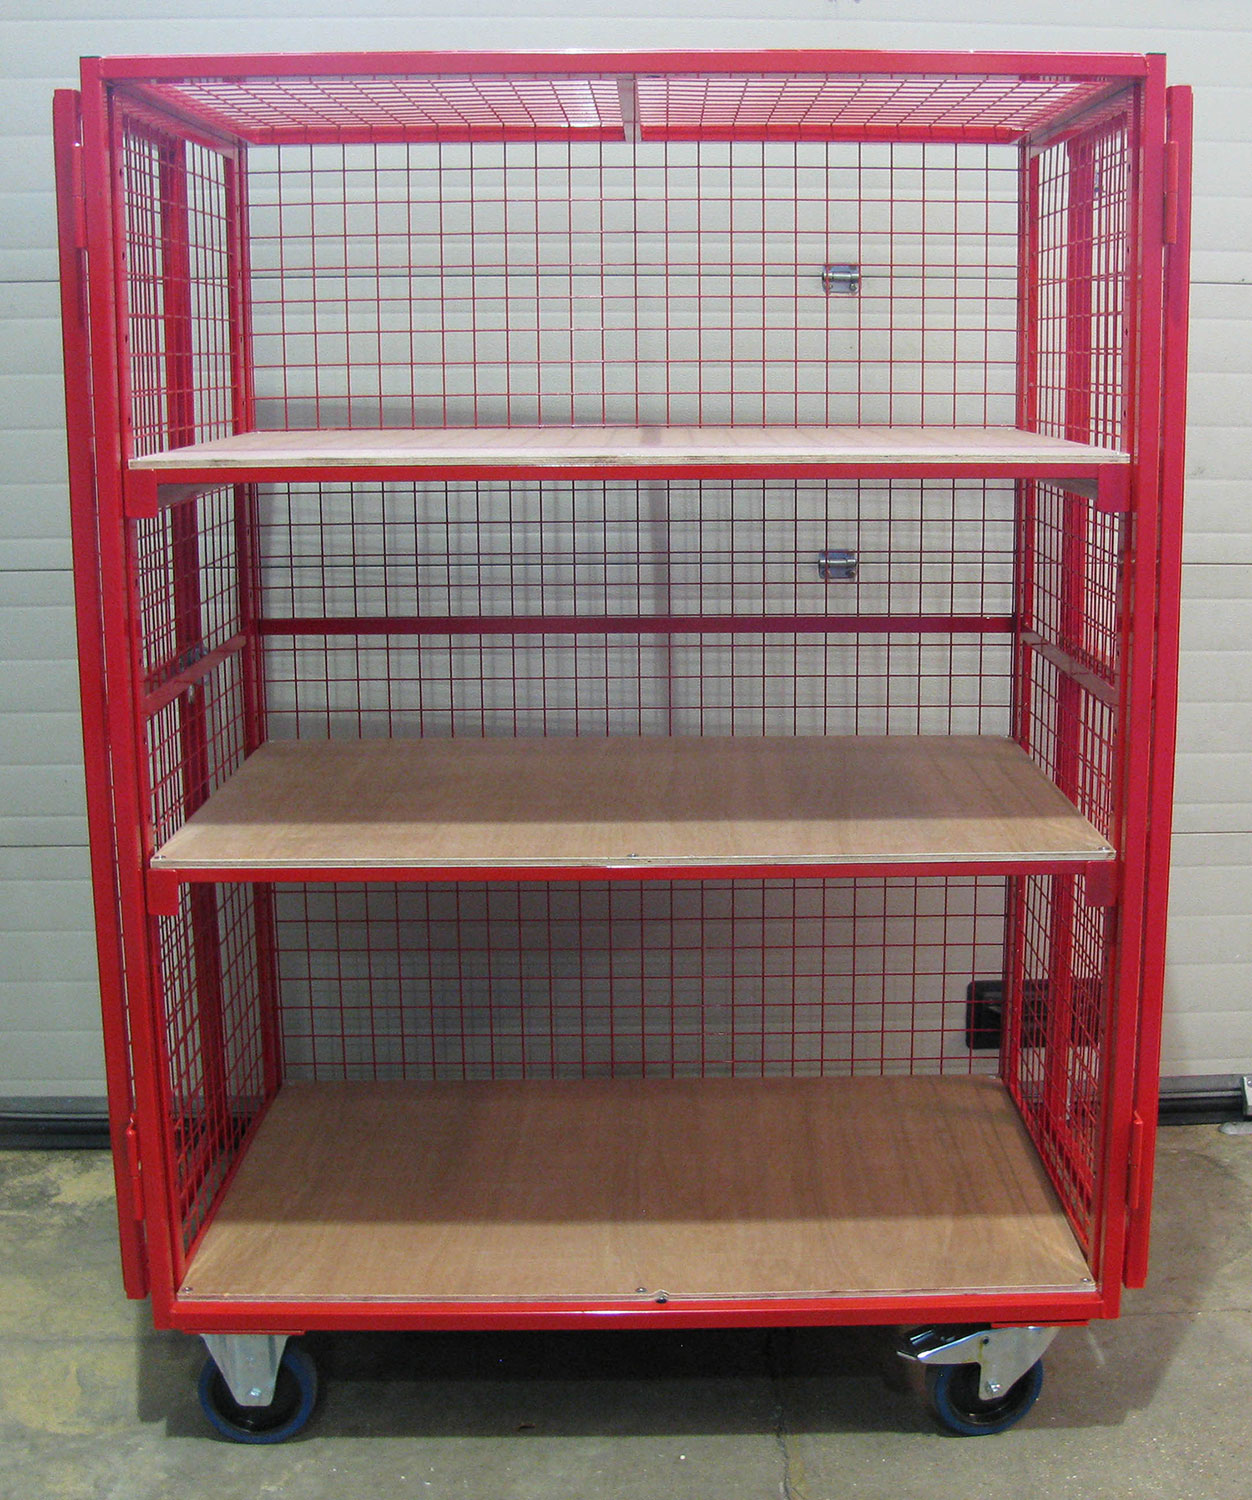 Stak-Red Mobile Mesh Security Cages With Adjustable Shelves - StakRed Mobile Cage 1